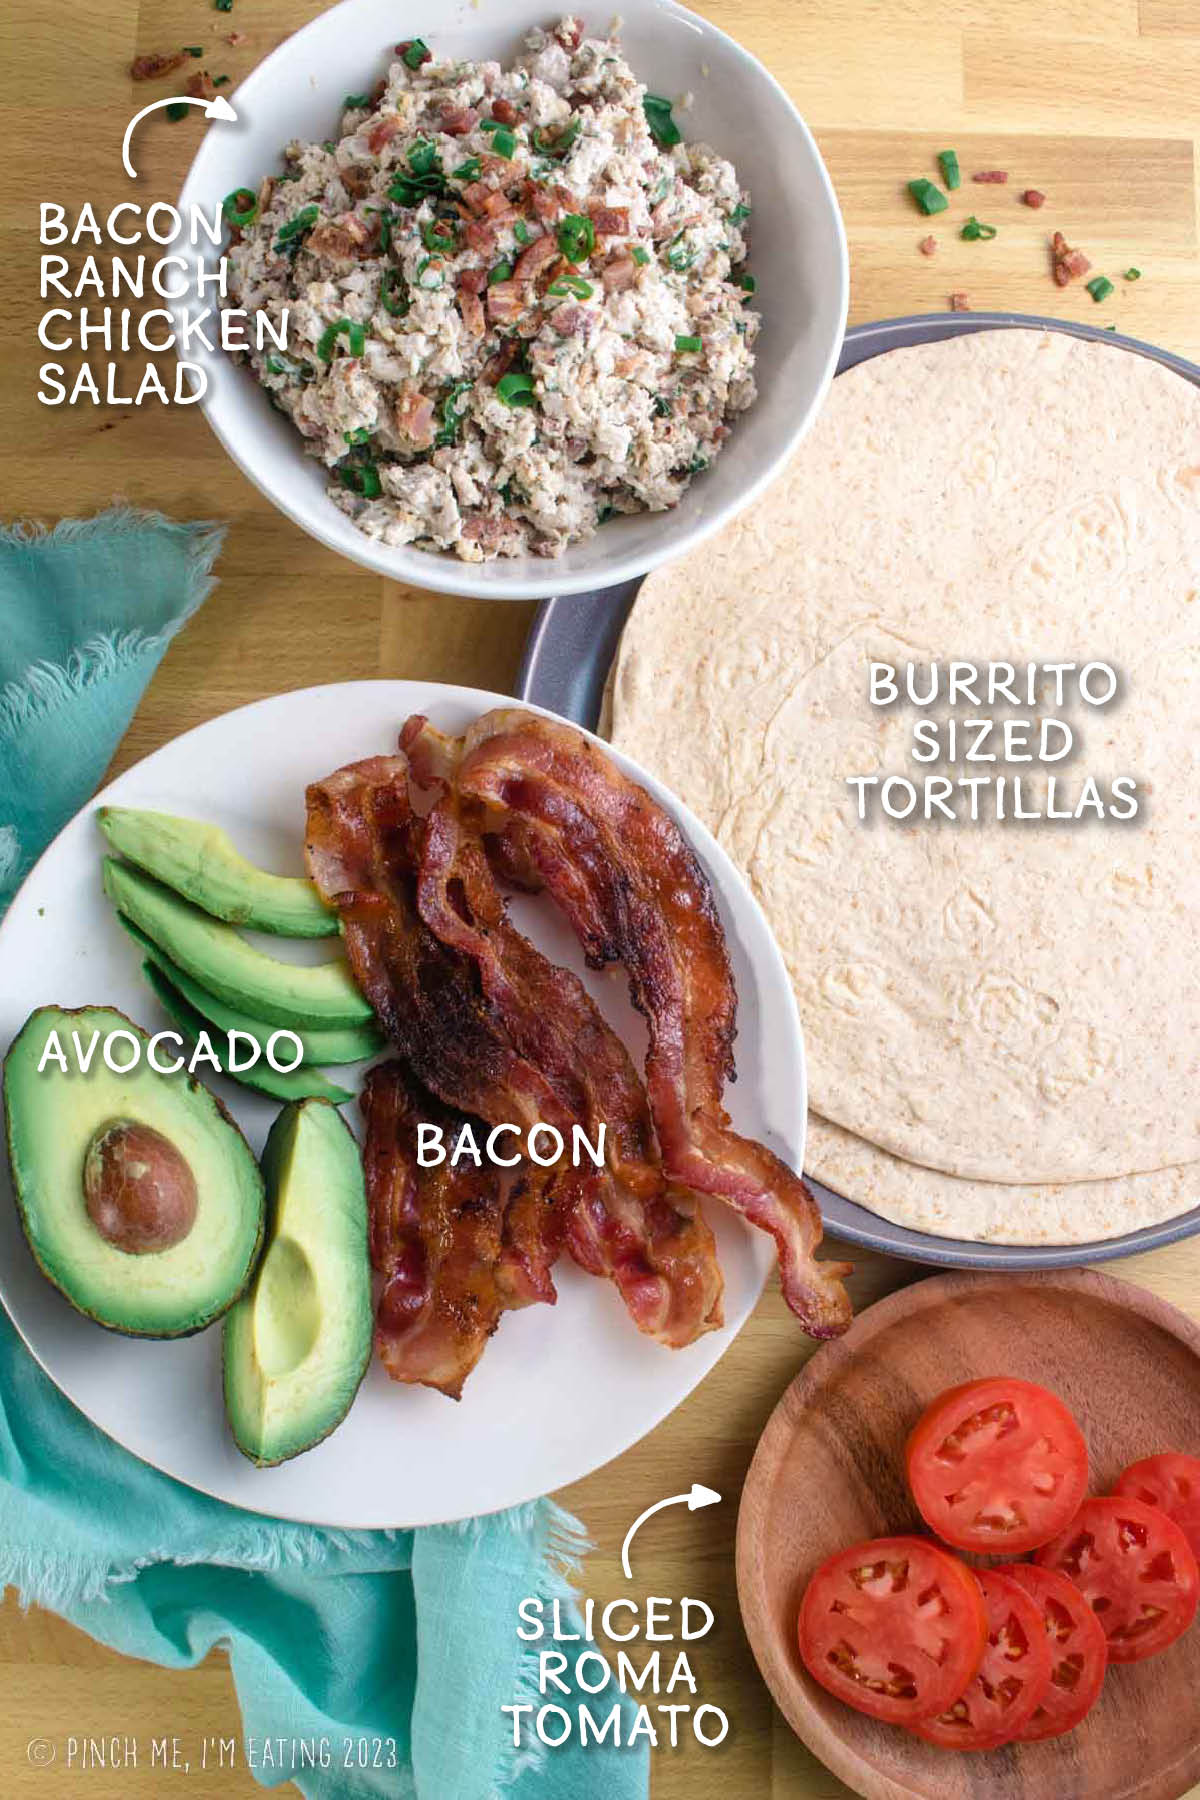 Ingredients for a bacon ranch chicken salad wrap with tomato and avocado.